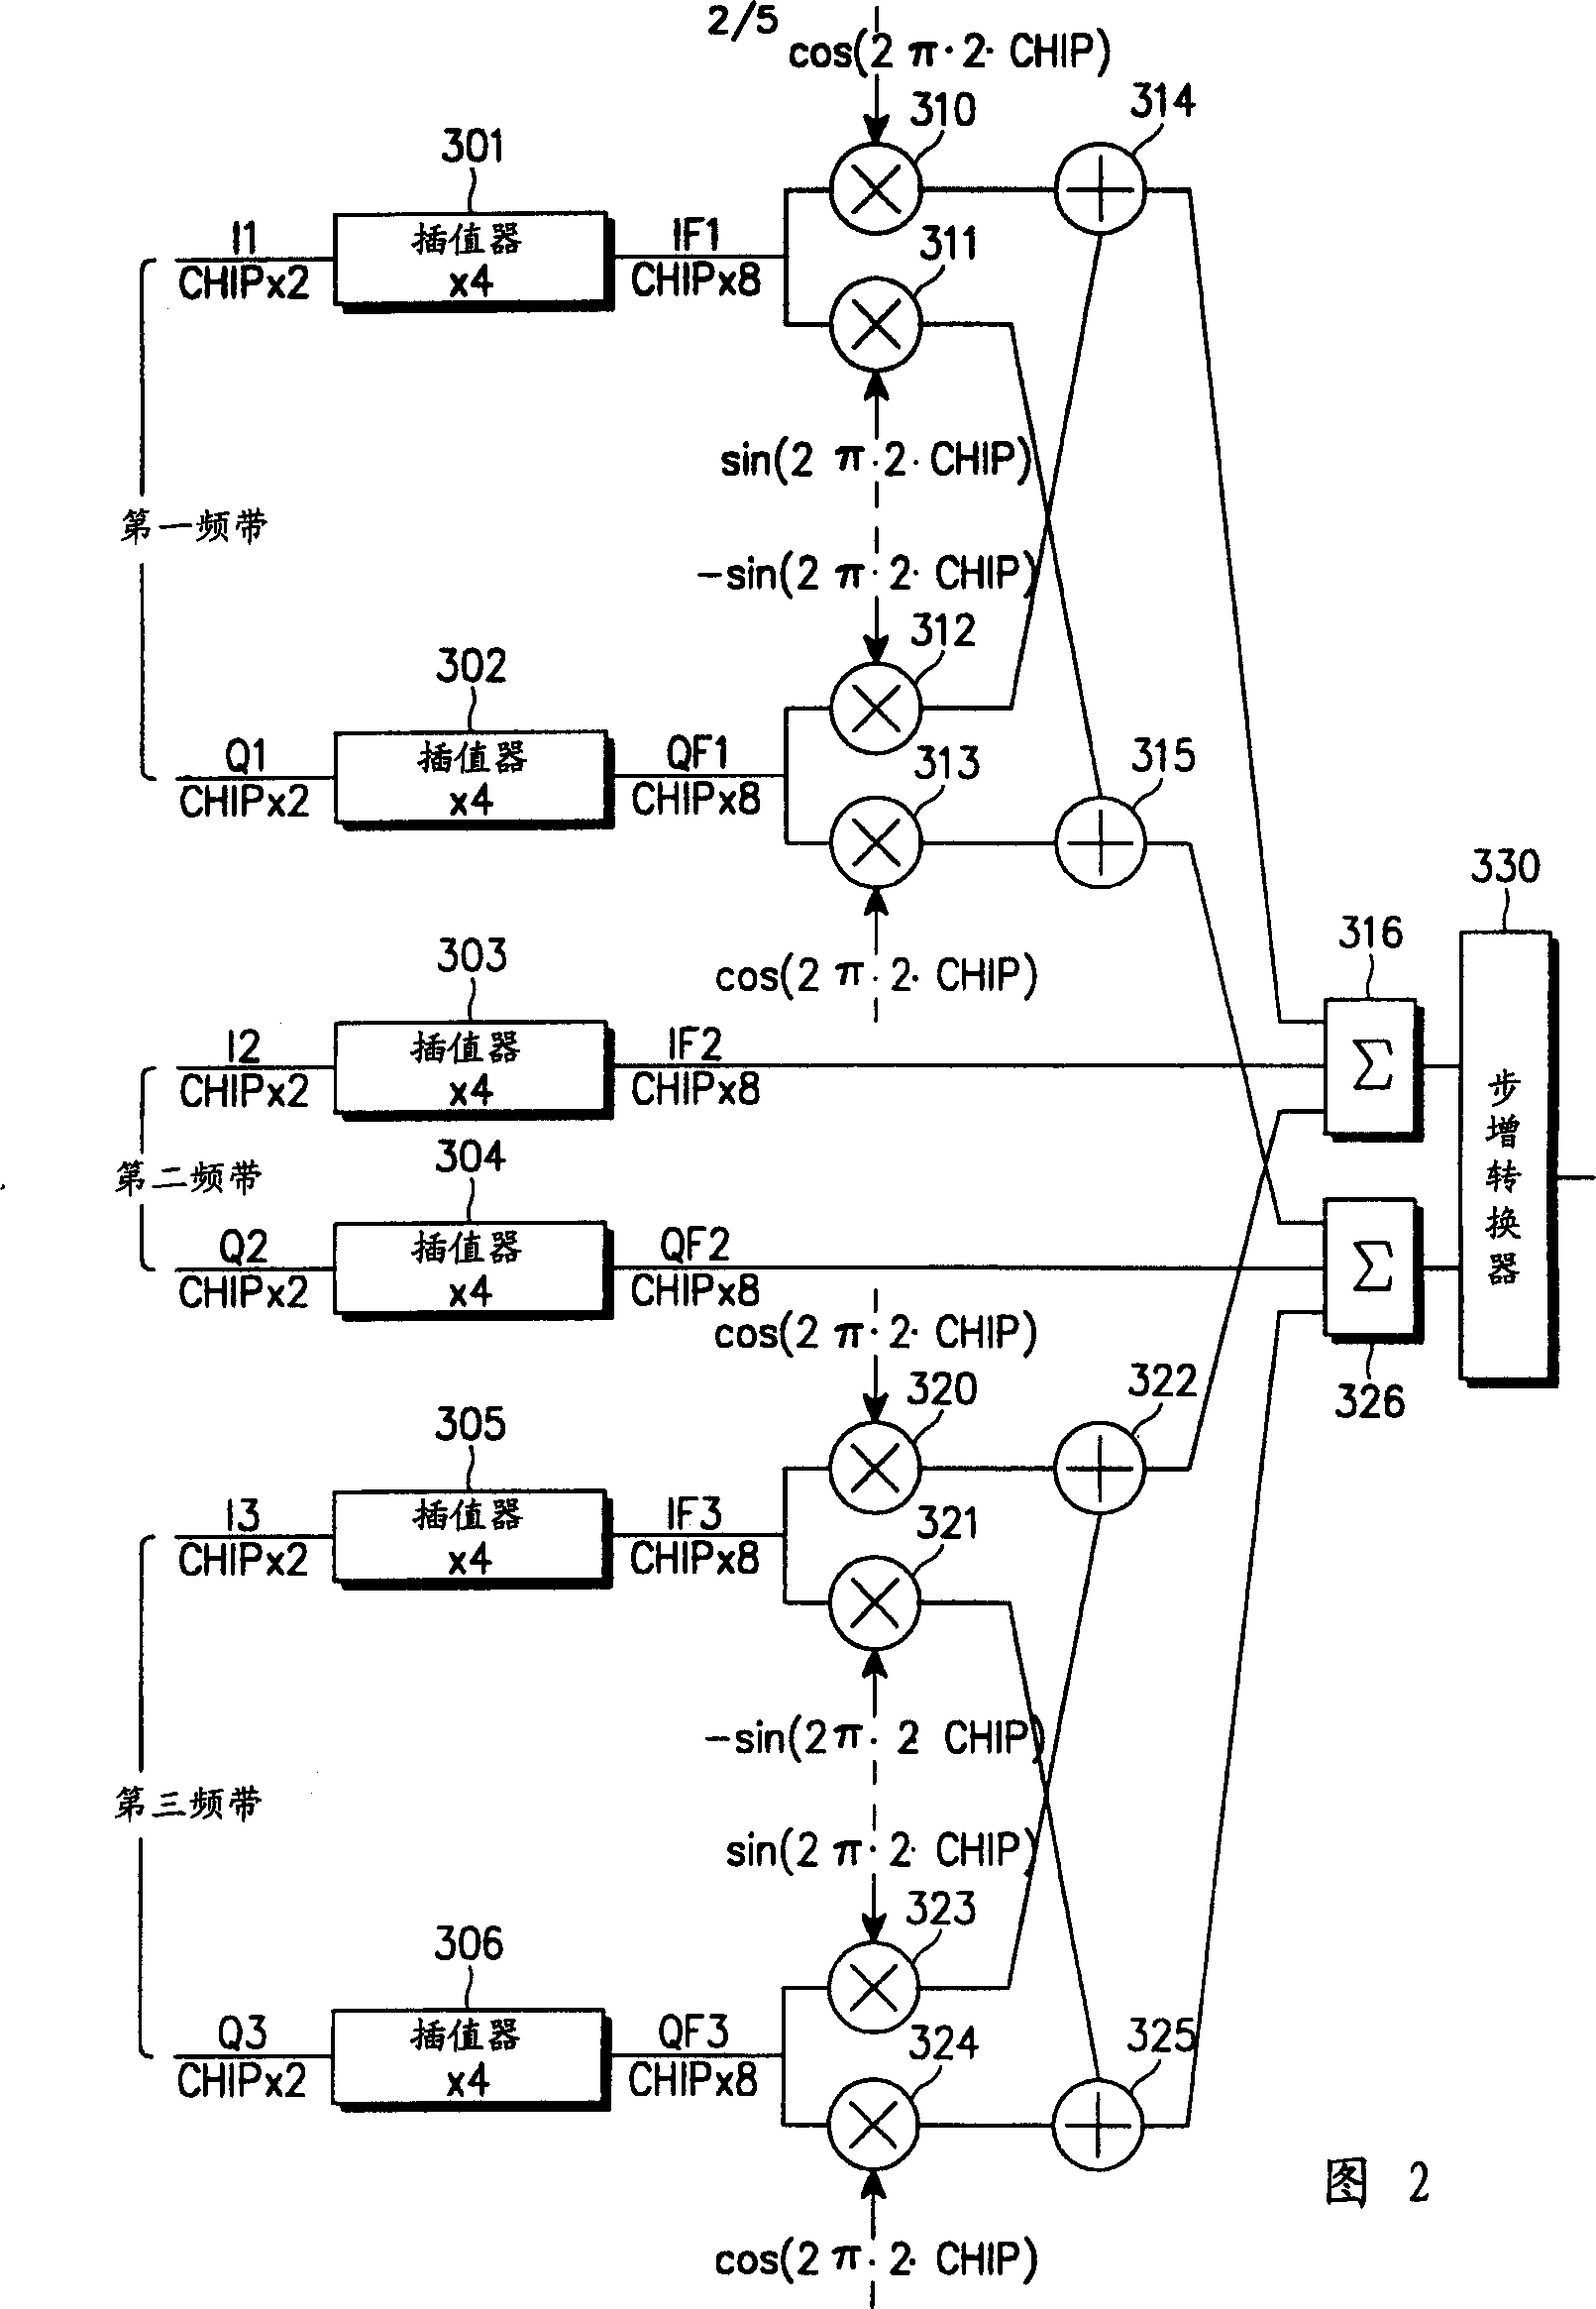 Equipment for forming beam in base station of mobile communication system